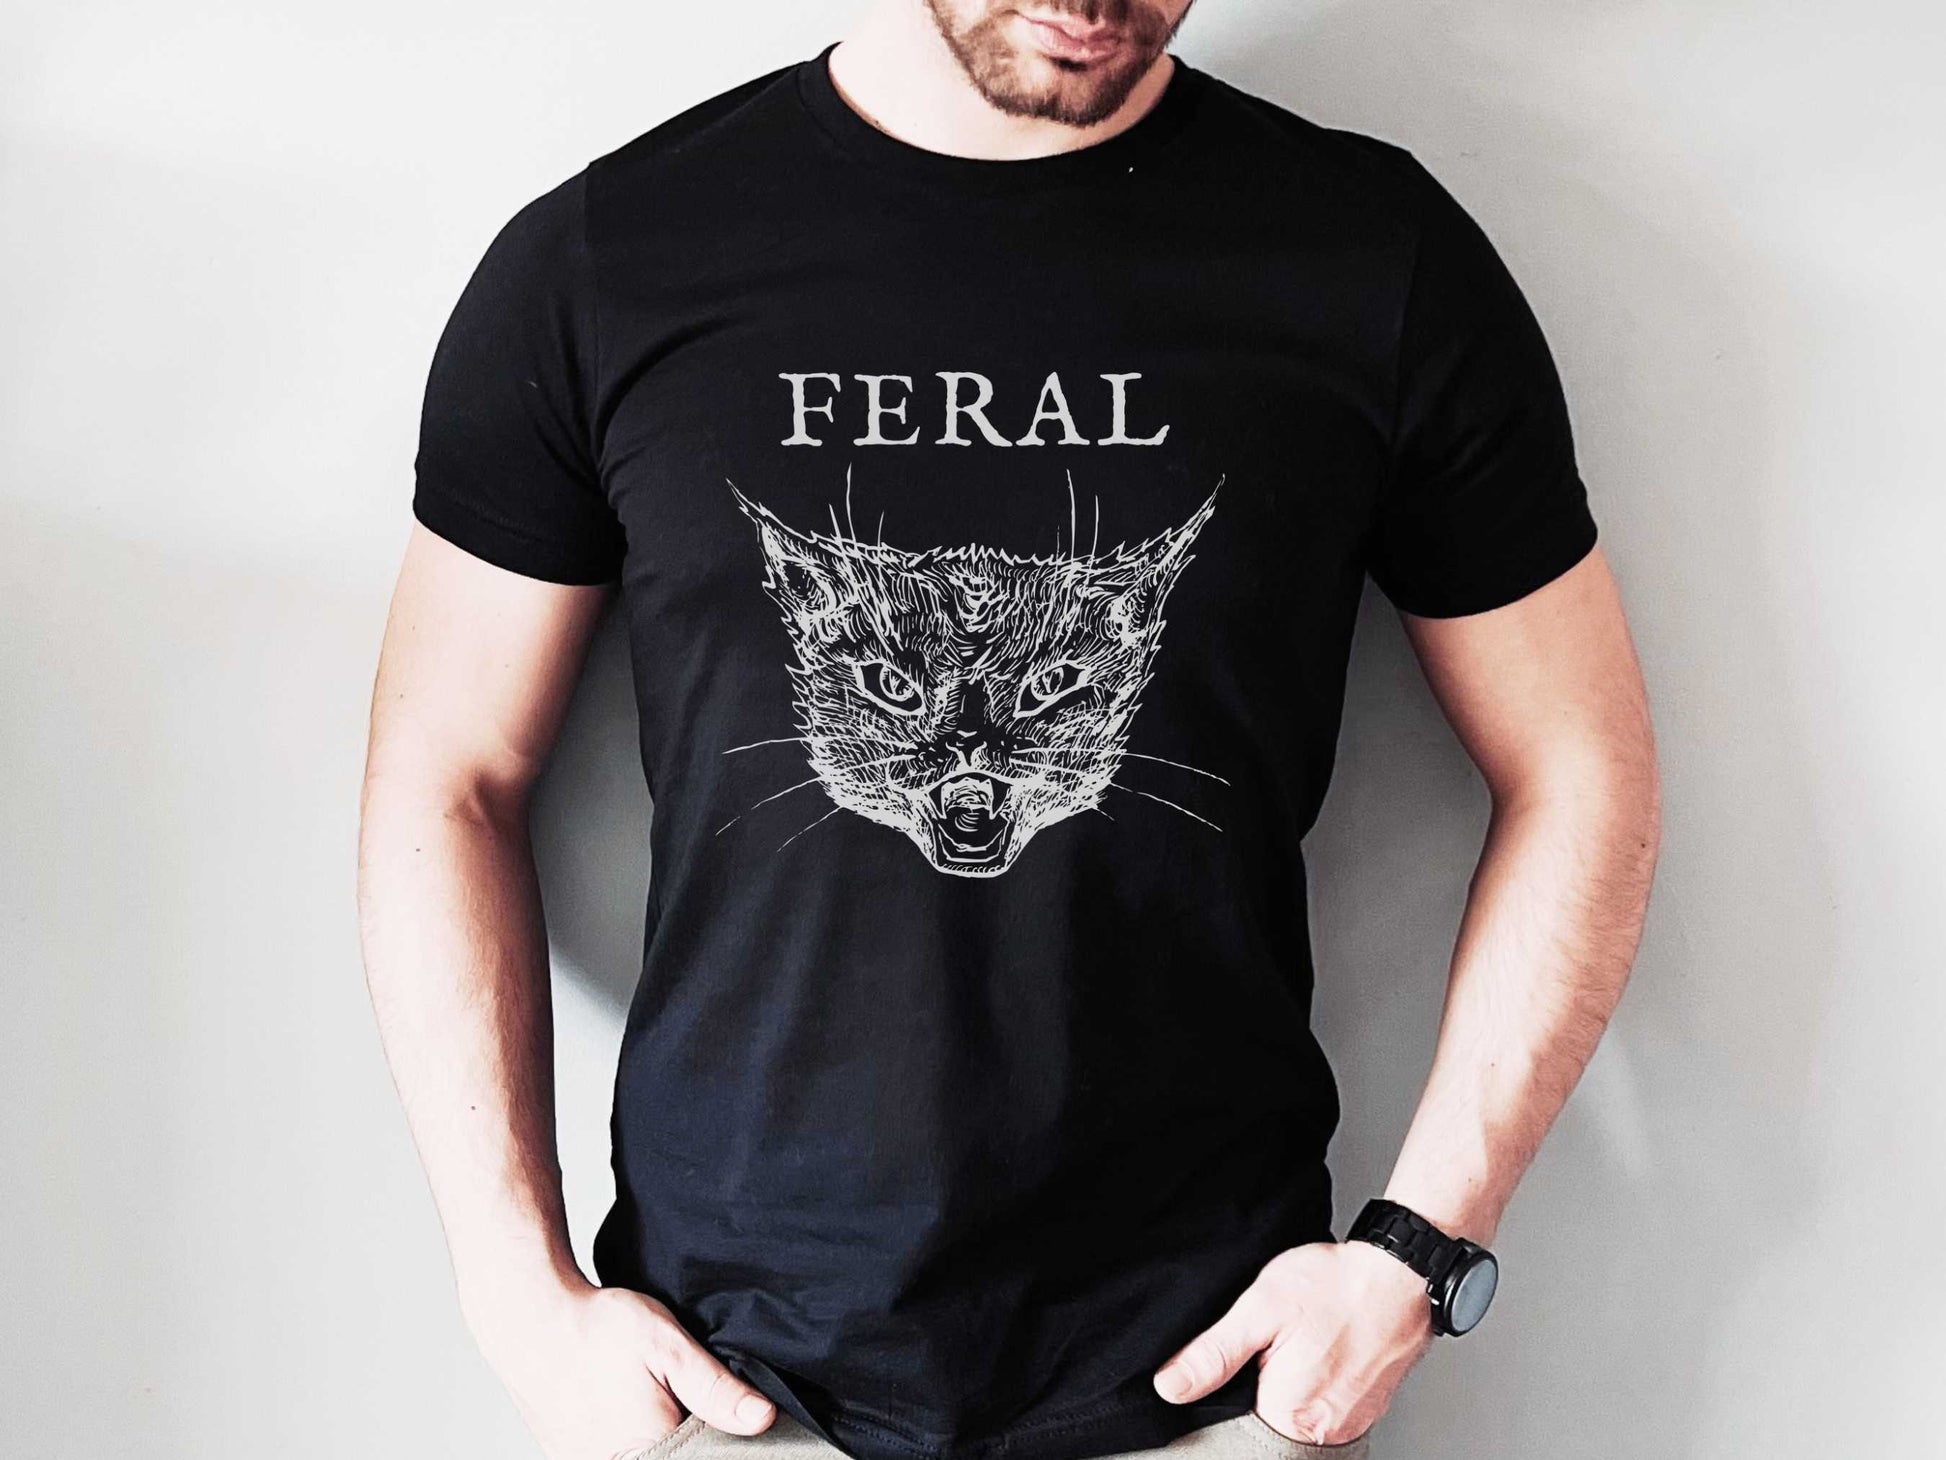 Feral T-Shirt in Black